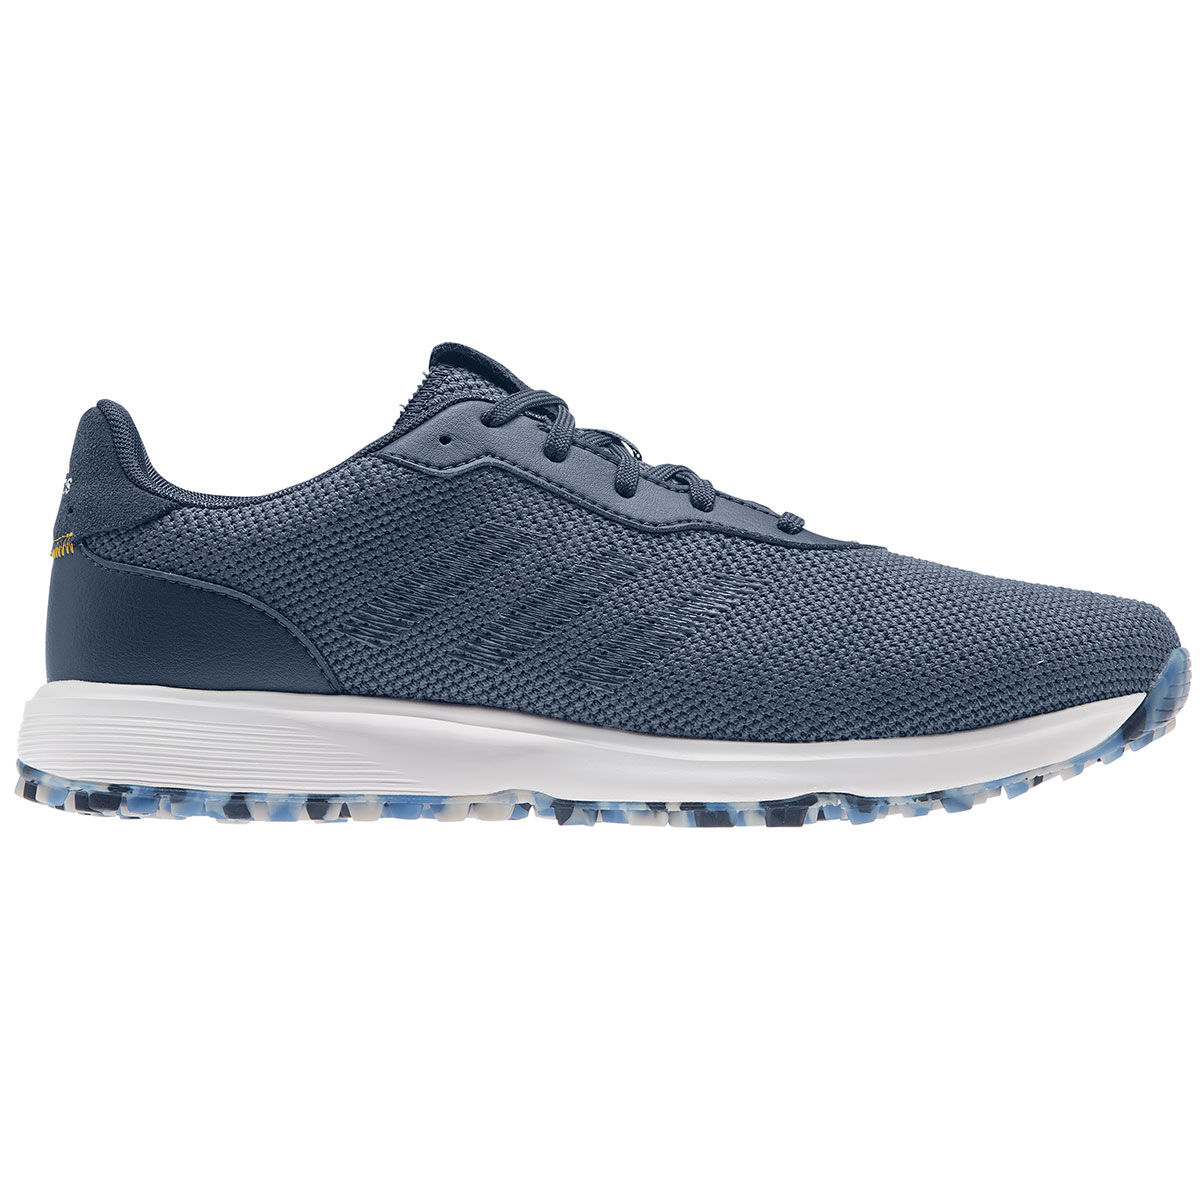 Chaussures adidas Golf S2G, homme, 7, Crew blue/crew navy/yellow, Normal | Online Golf